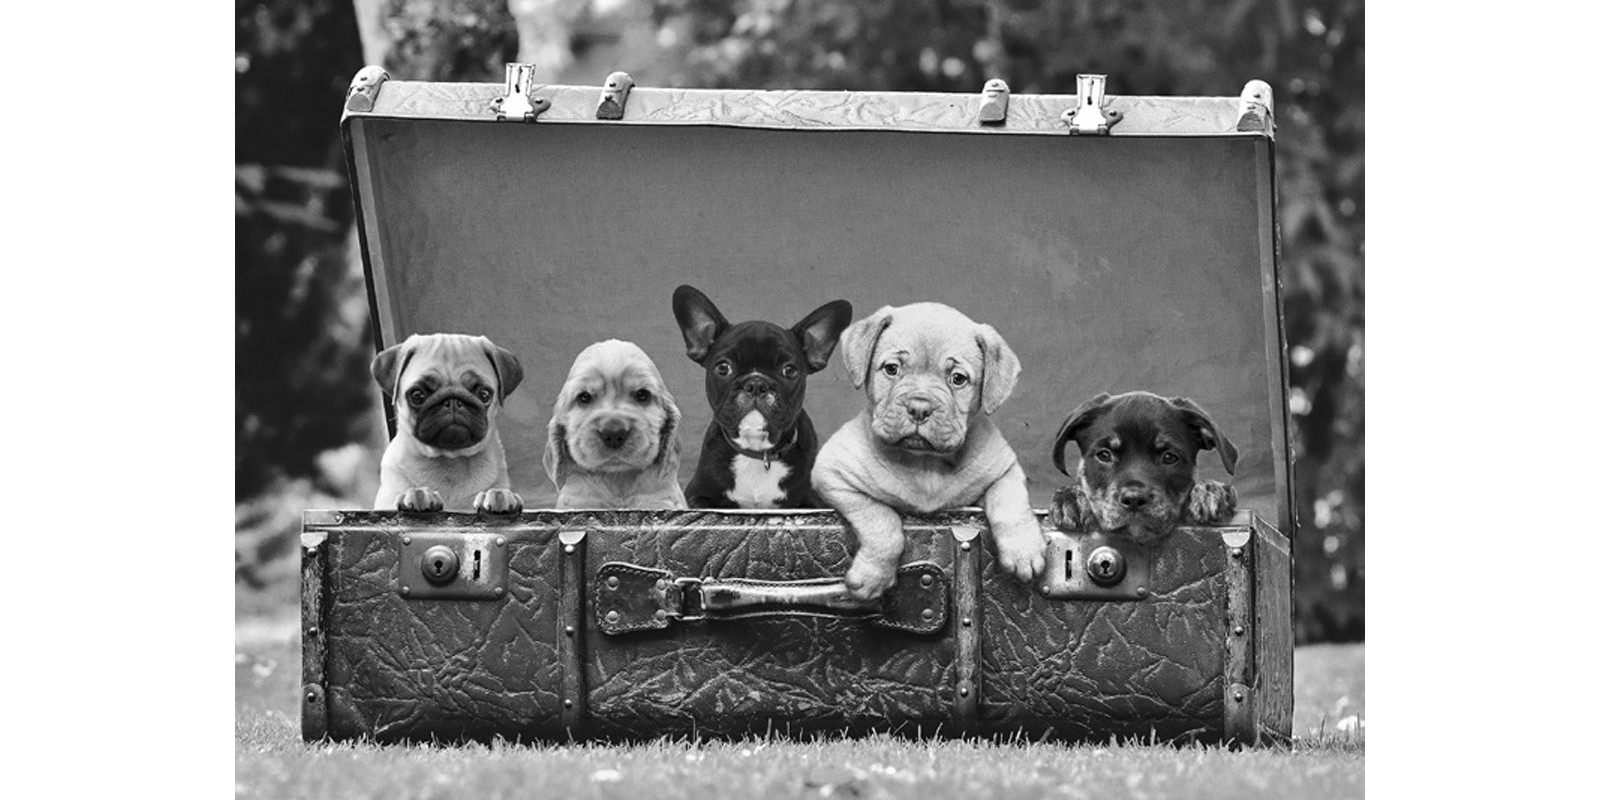 Pangea Images - Dog Pups in a Suitcase (detail)